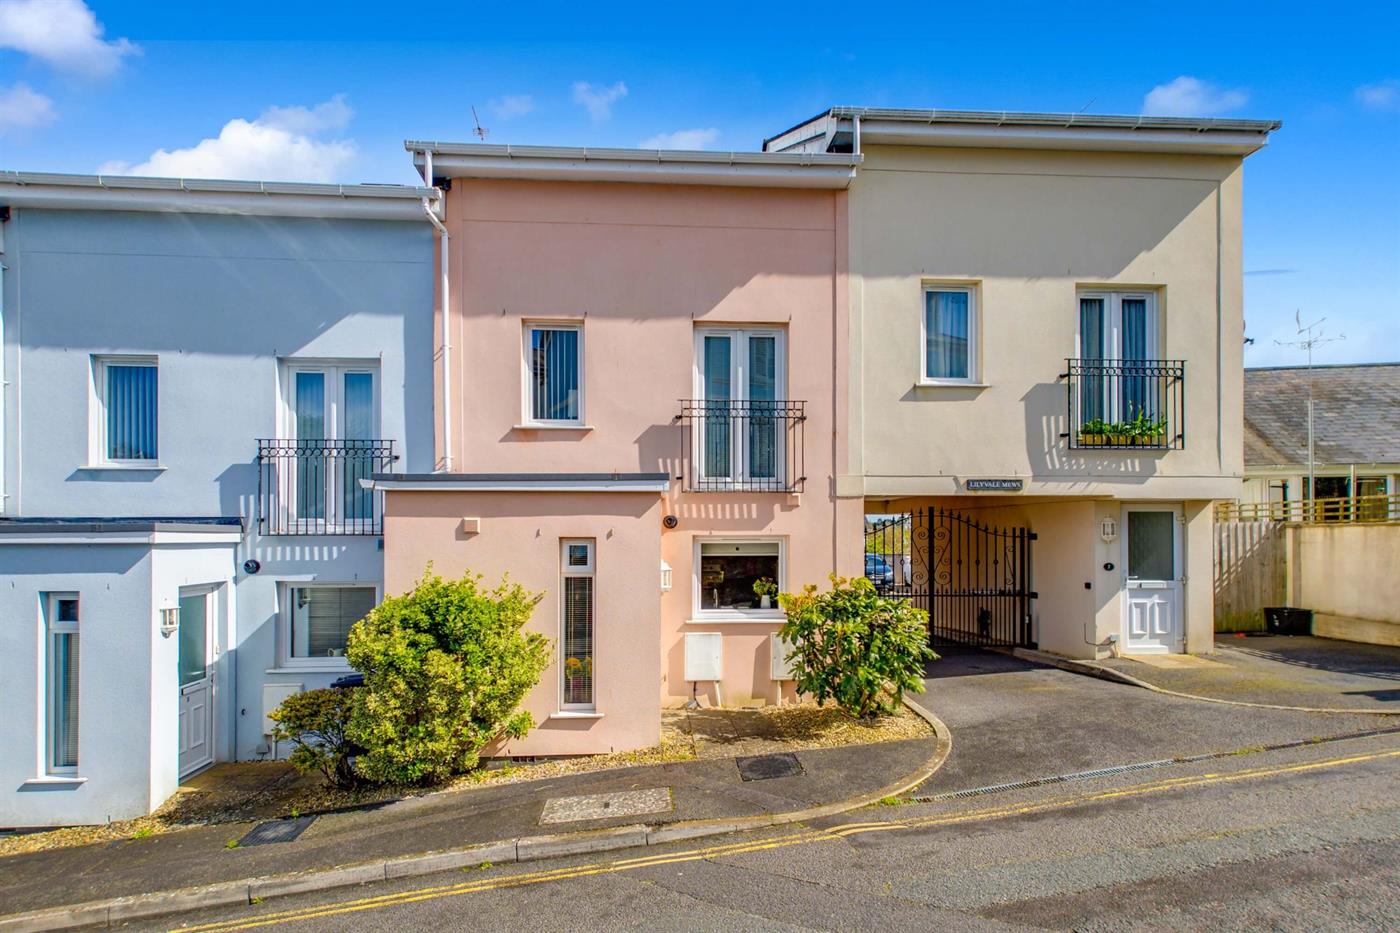 3 Bedroom Town House for Sale: Lily Vale Mews, Havelock Road, St Marychurch, Torquay, TQ1 4LZ